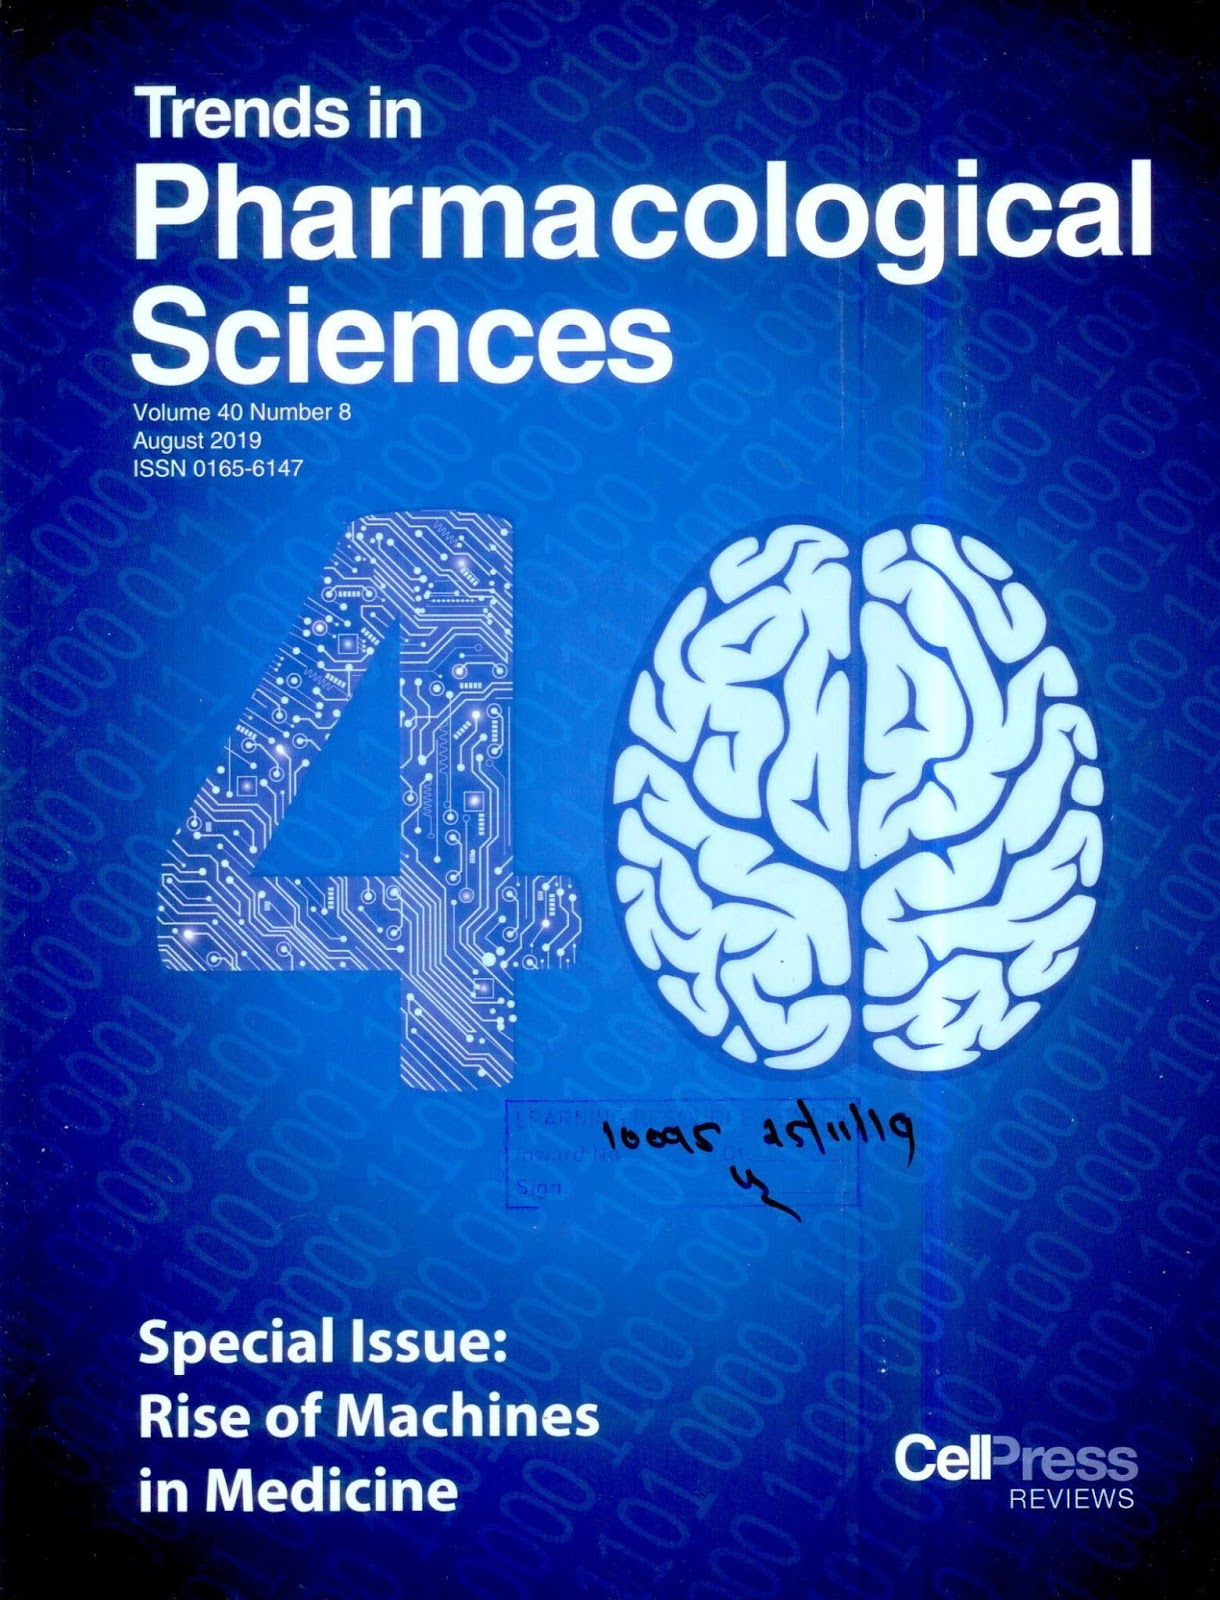 https://www.cell.com/trends/pharmacological-sciences/issue?pii=S0165-6147(18)X0009-1